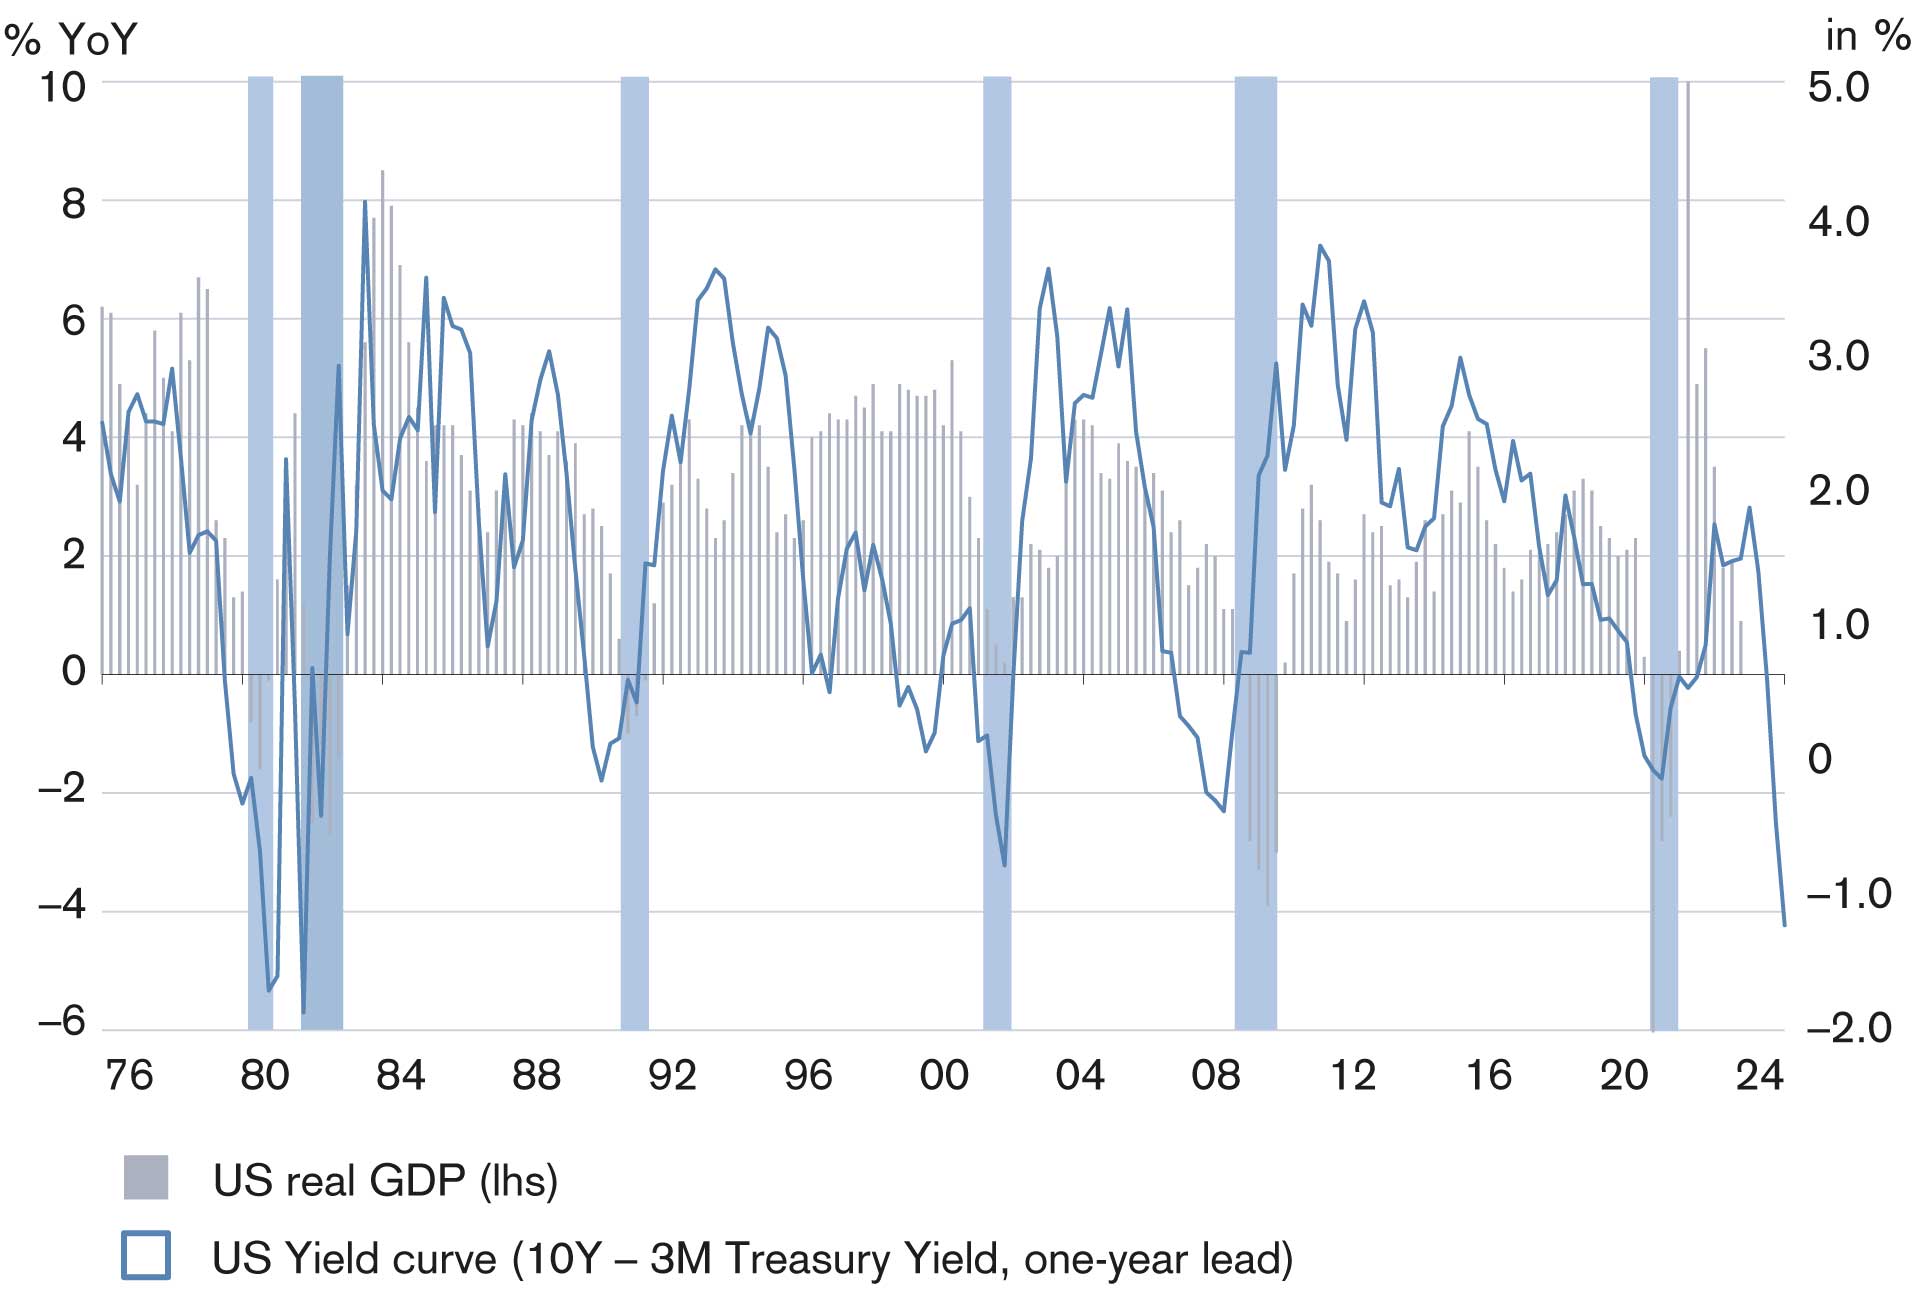 The chart shows the correlation between a drop in real GDP data (growth rate on left-hand scale) and the inversion of the USD yield curve (curve steepness measured by differential between 10Y rate and 3M Treasury Yield).